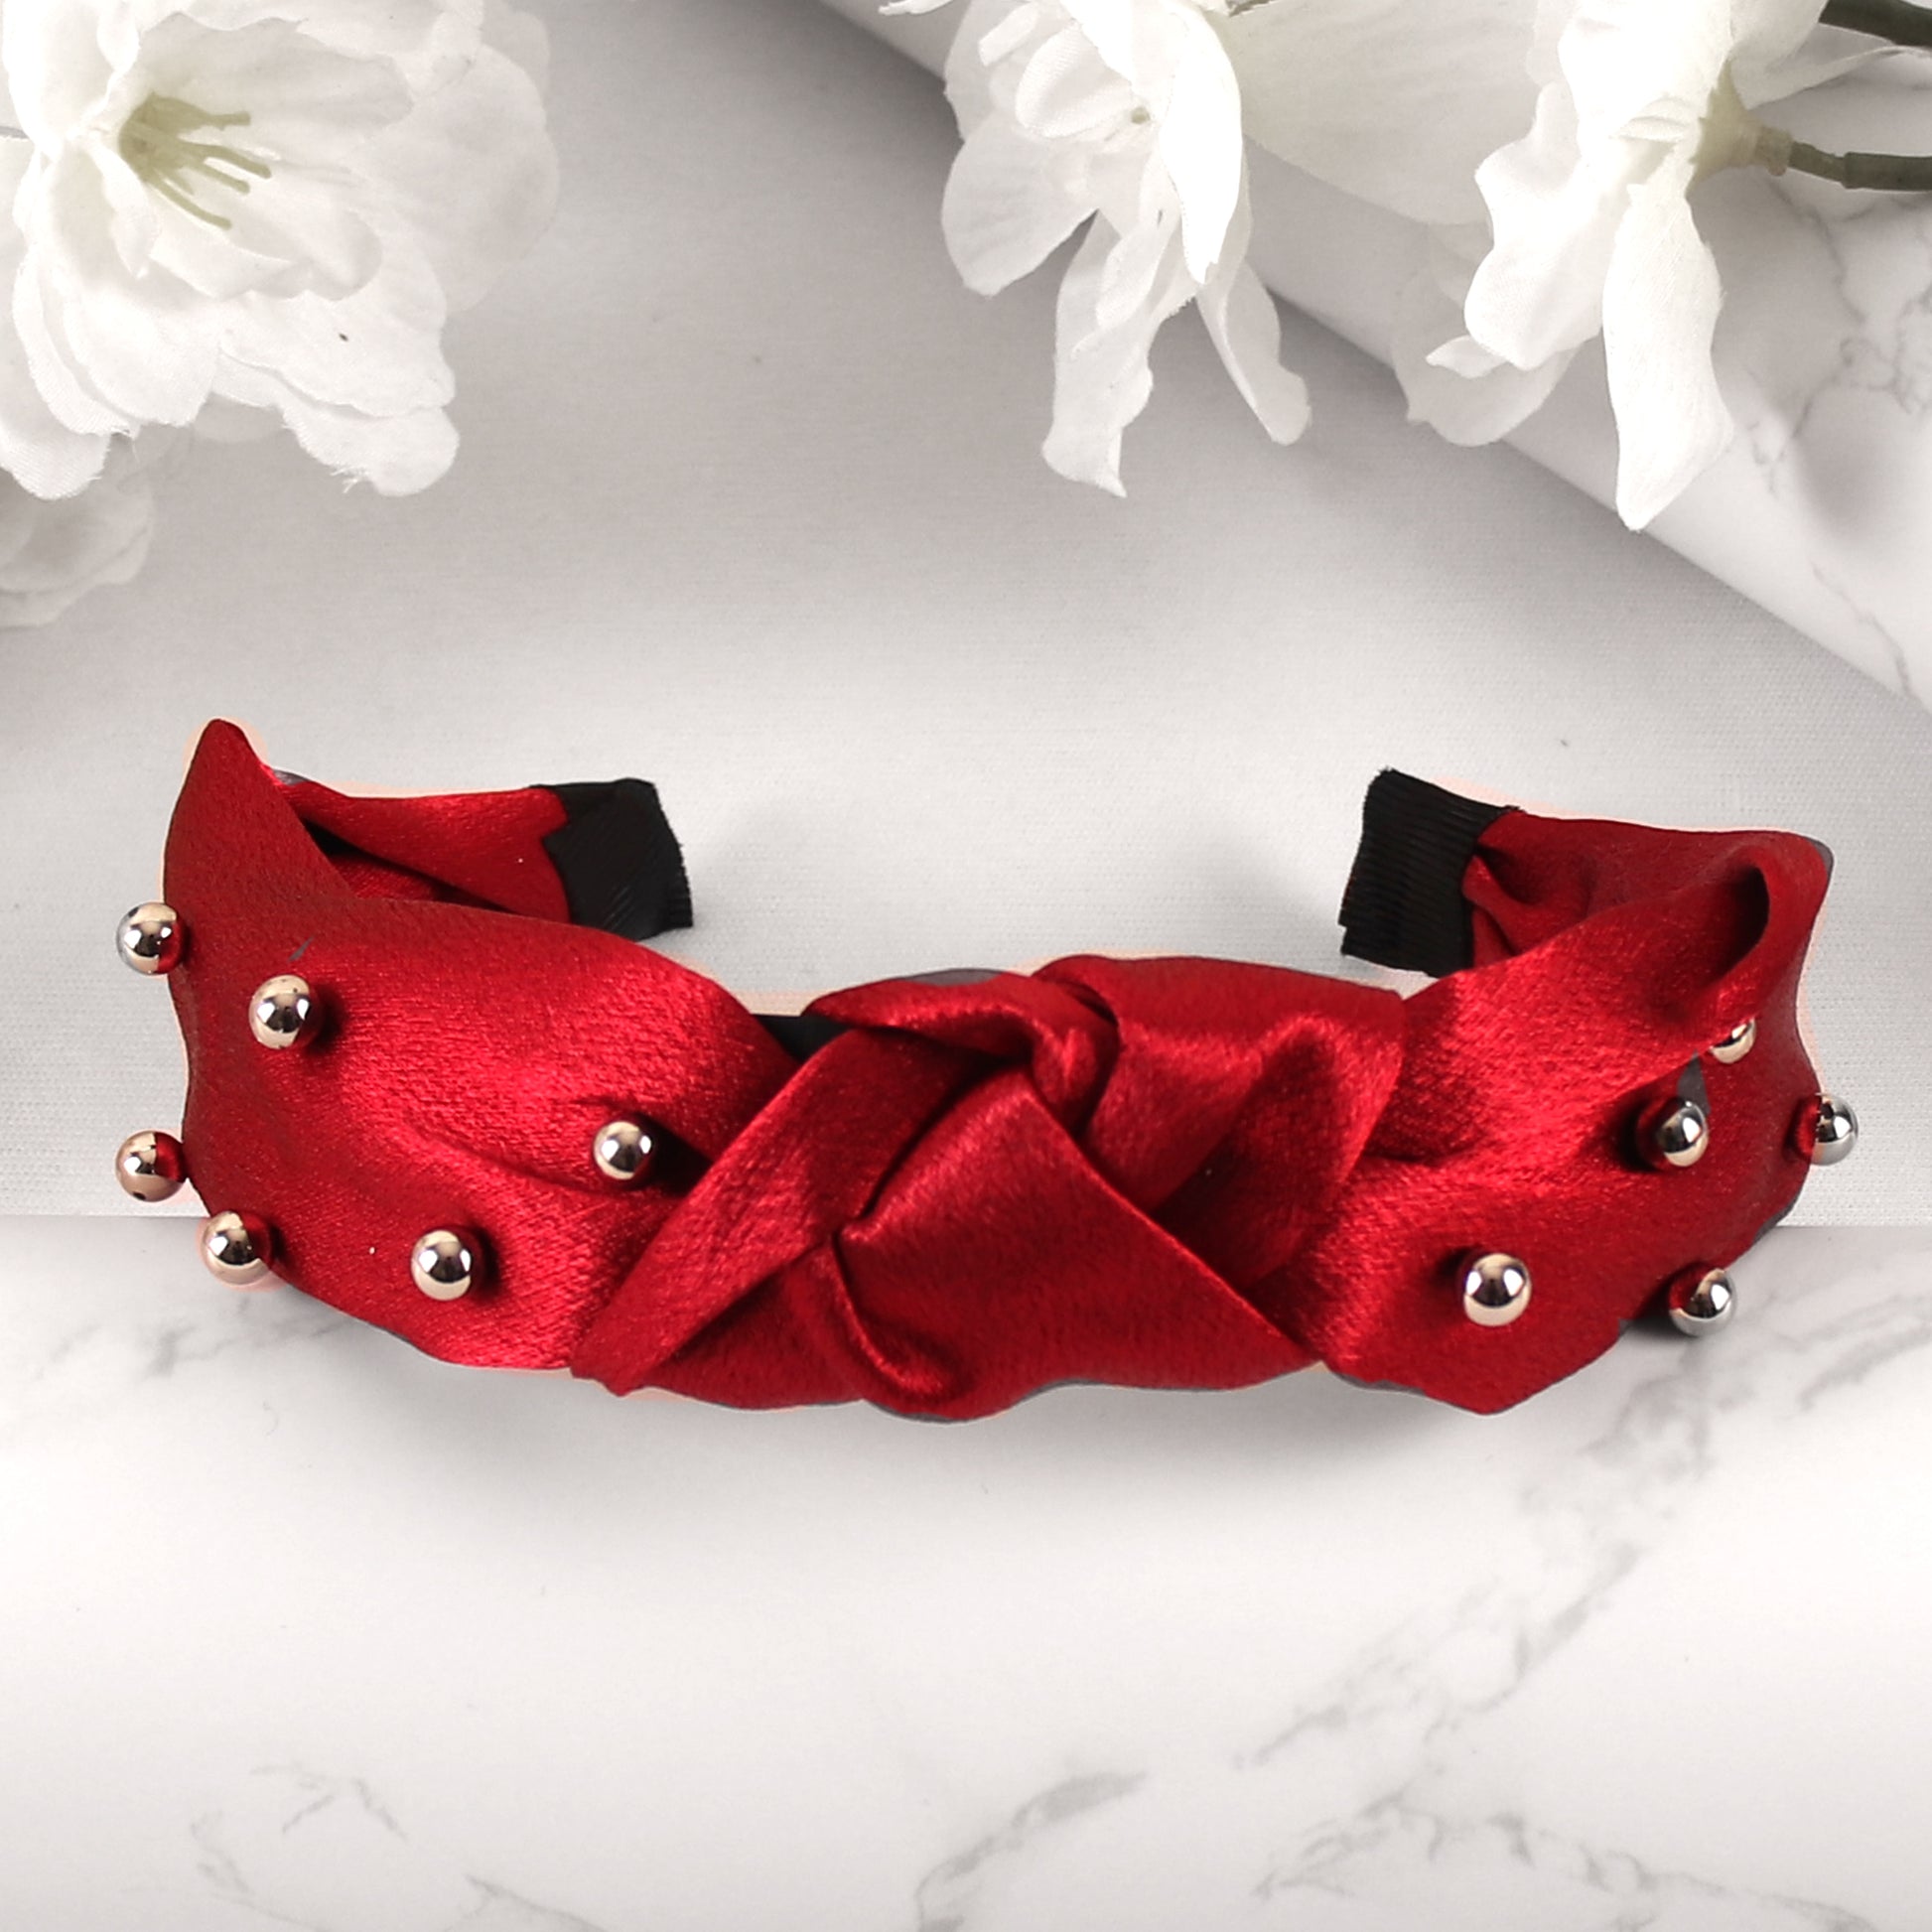 HairBand,The Hair Flair Satin Hair Band in Red - Cippele Multi Store